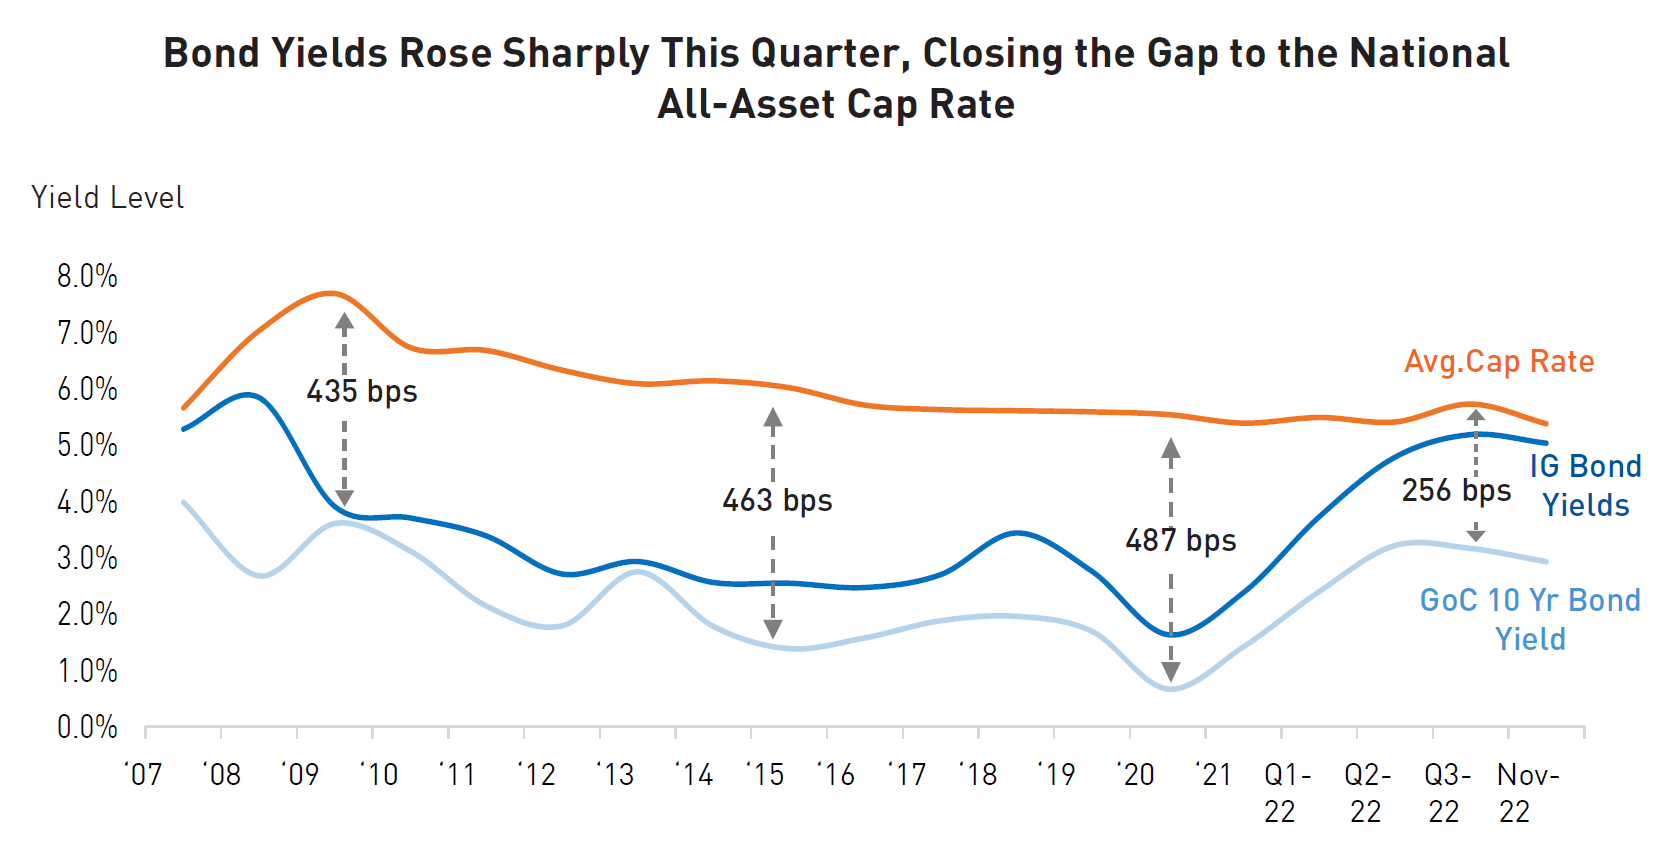 Bond Yields Rose Sharply This Quarter, Closing the Gap to the National  All-Asset Cap Rate